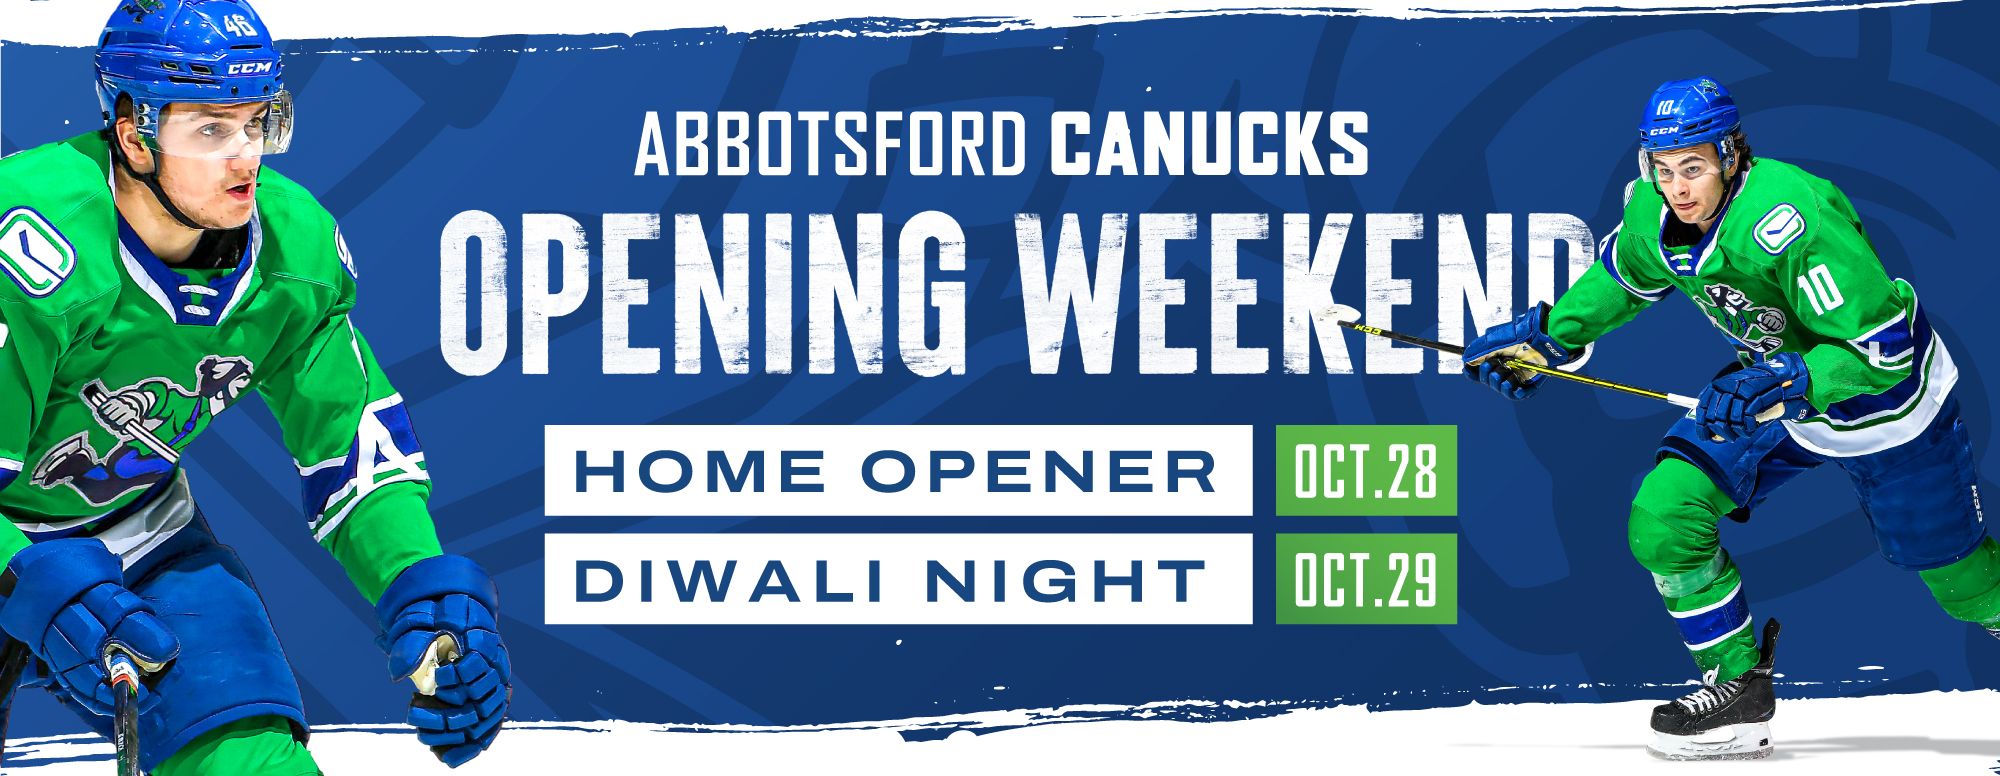 SINGLE GAME TICKETS FOR FIRST HALF OF SEASON ON SALE NOW Abbotsford